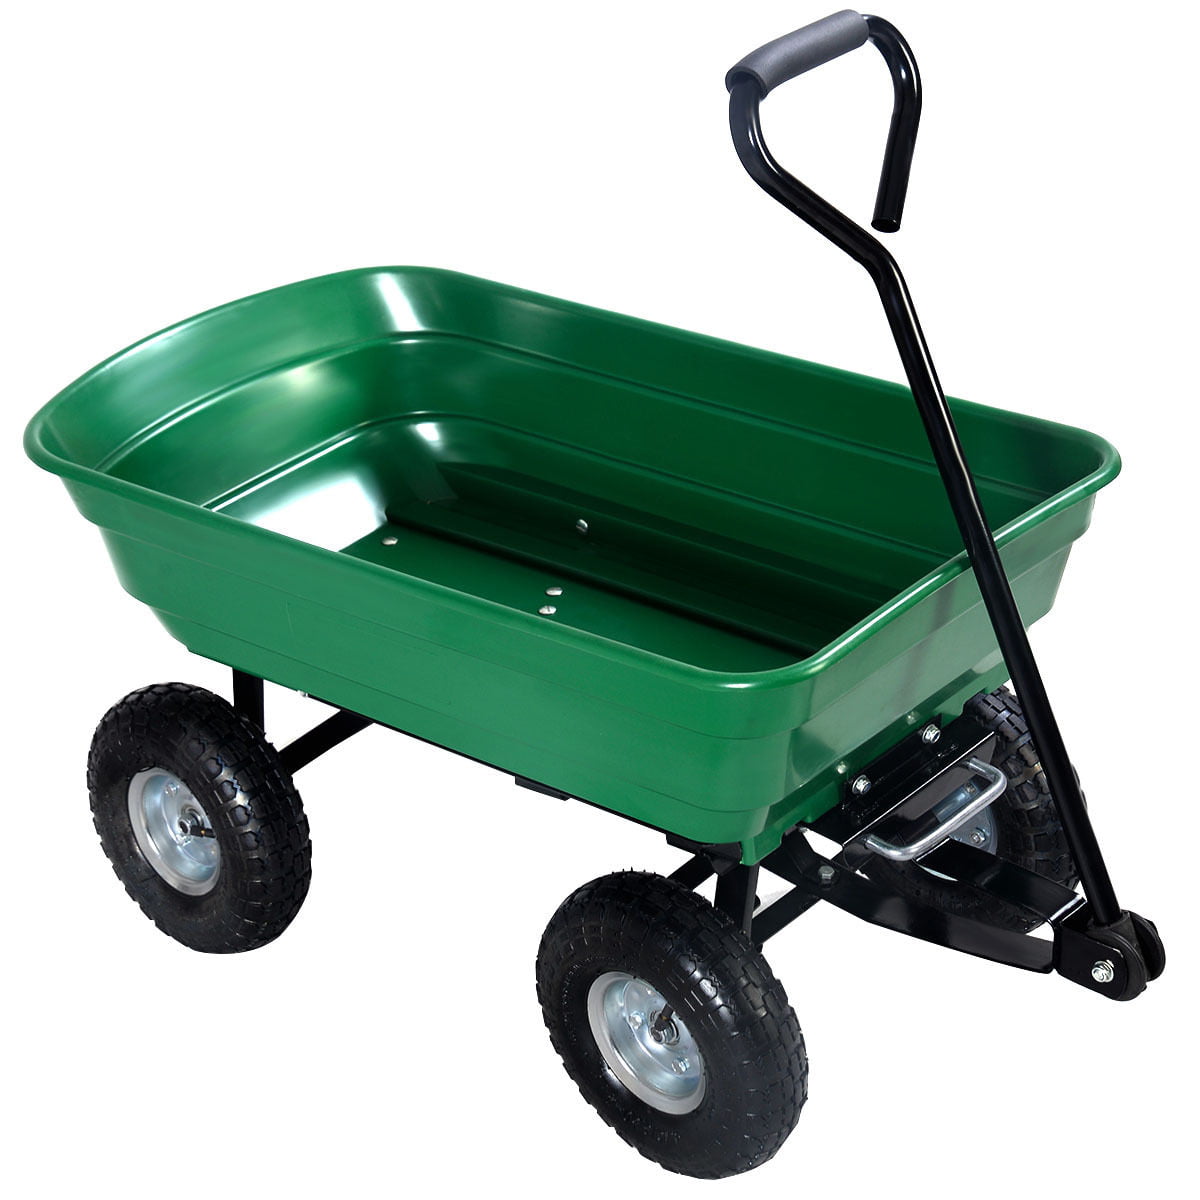 Green mecor Dump Garden Cart with Heavy Duty Poly Garden Utility Yard Wagon with Wheels,Flat Free Tires 660lbs Multifunctional Pulling Wagon